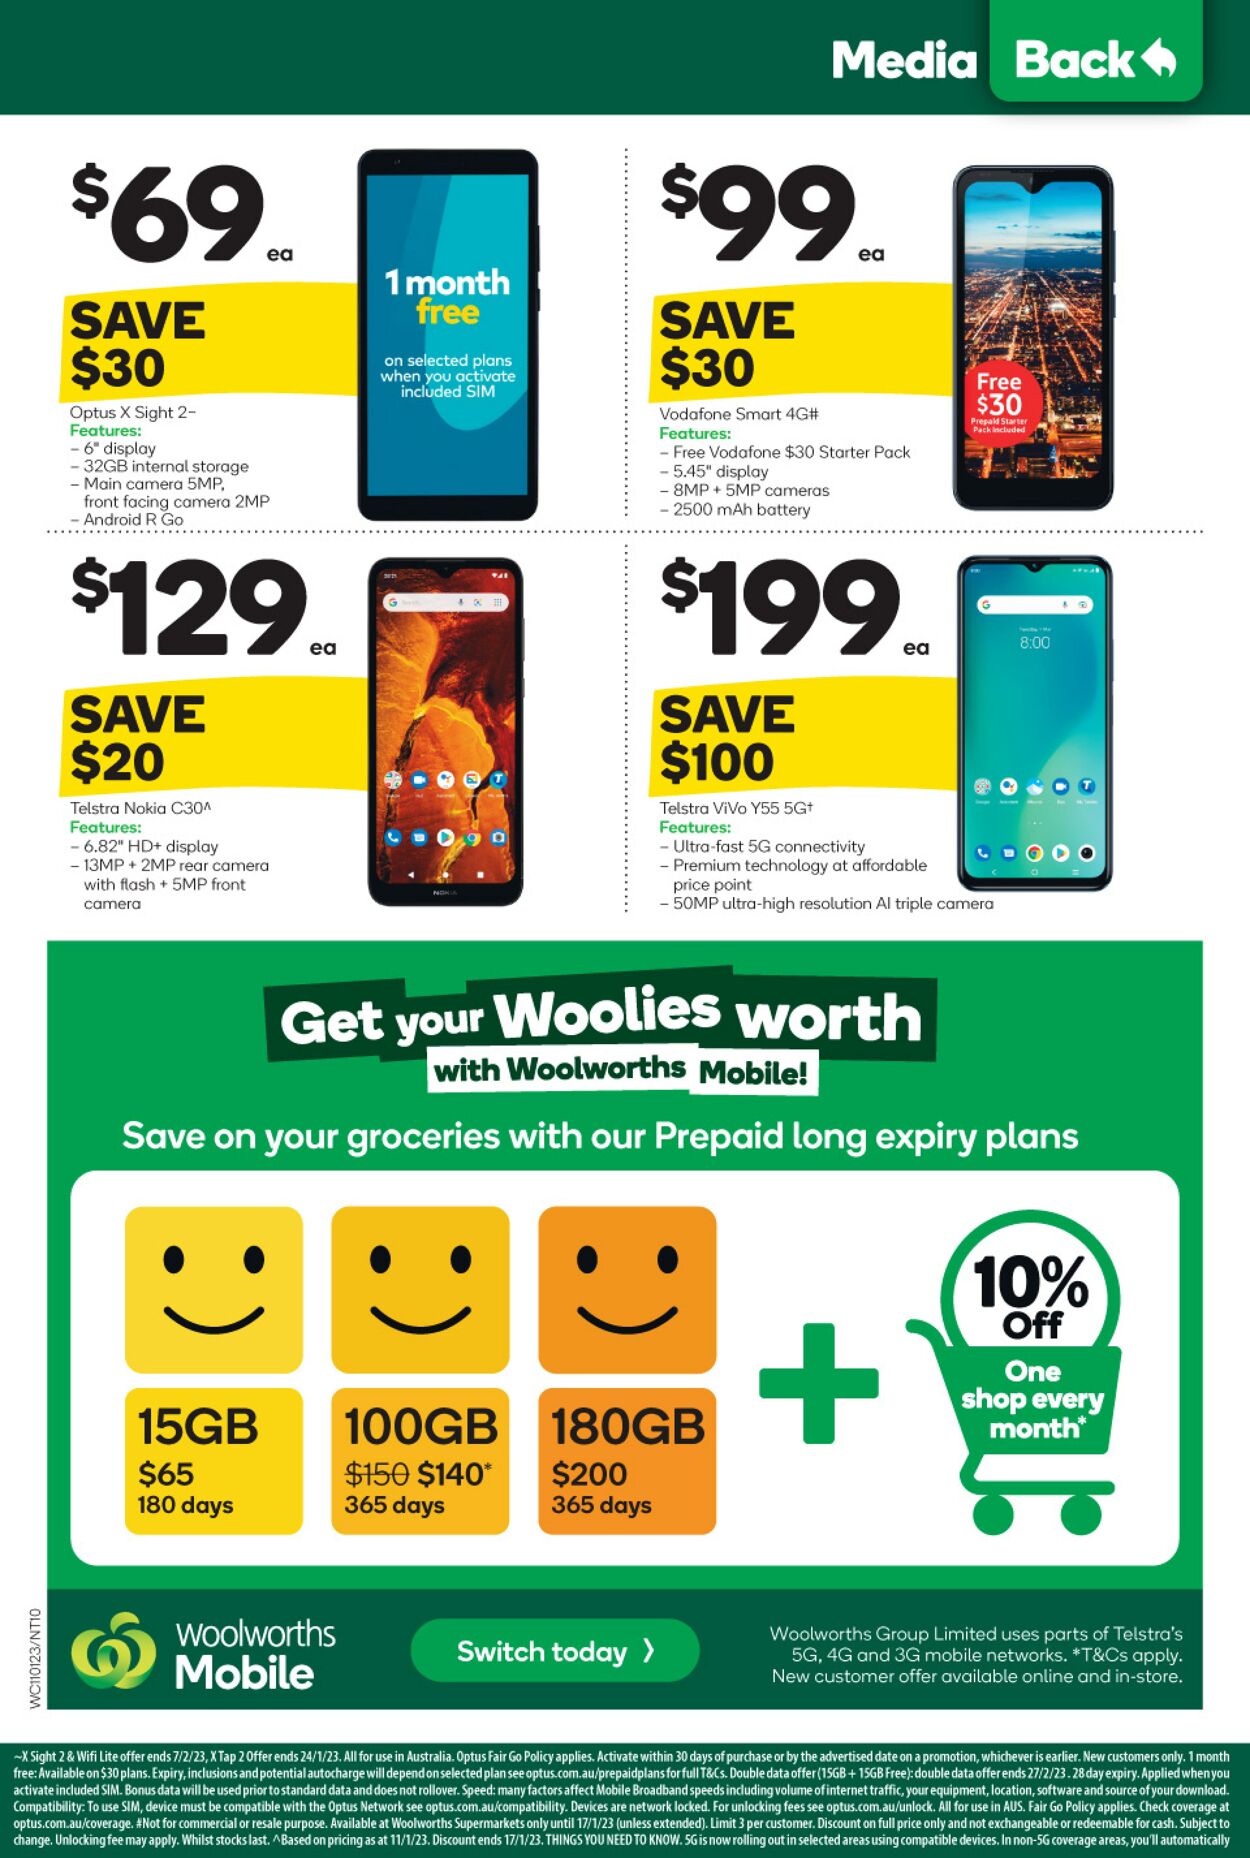 Catalogue Woolworths 11.01.2023 - 17.01.2023